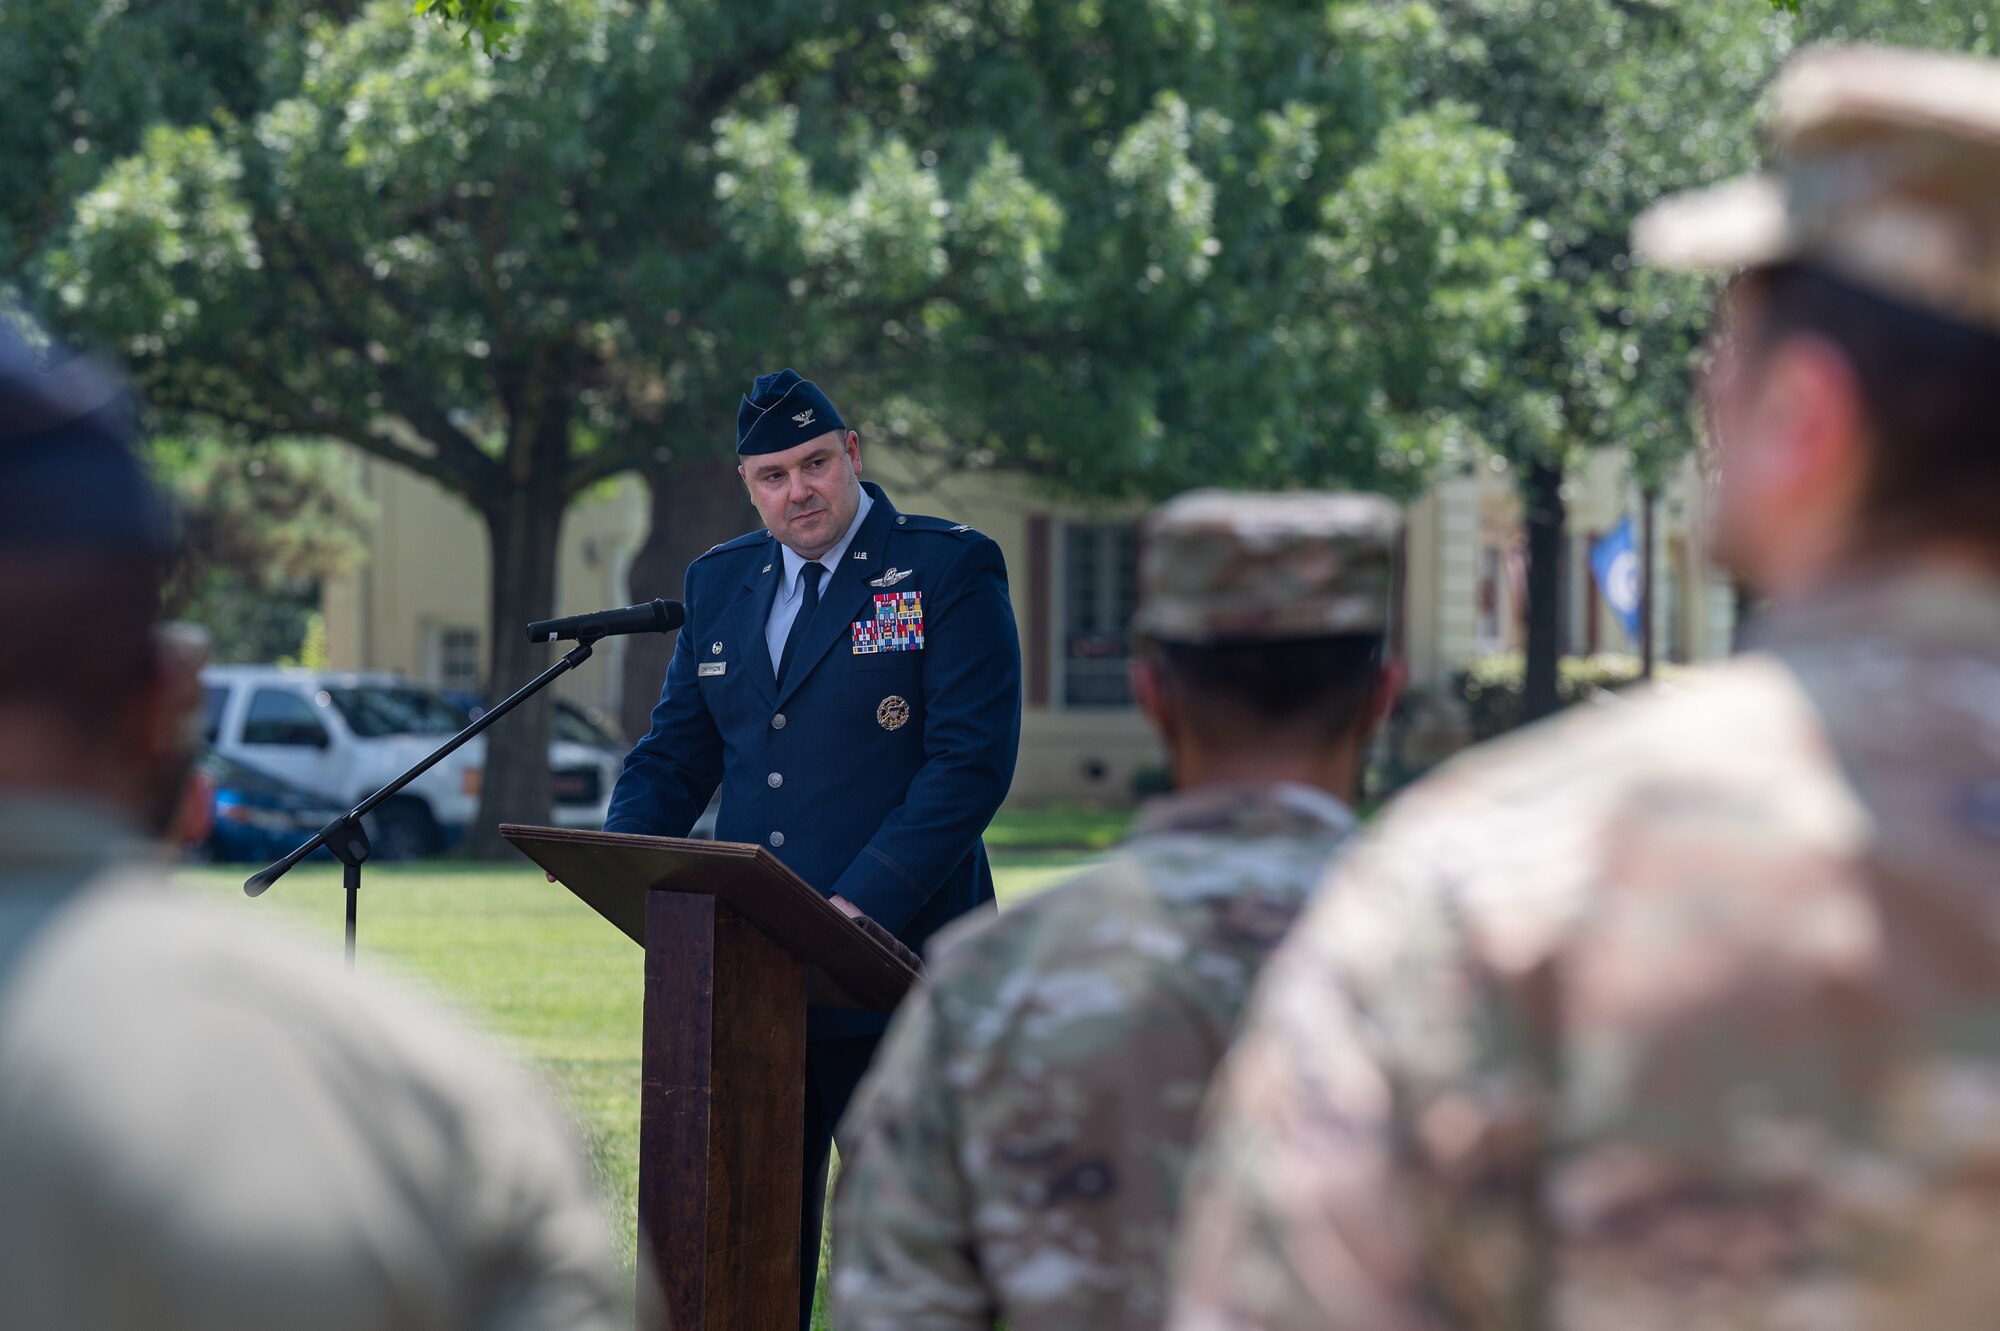 Col. Mark Dmytryszyn, 2nd Bomb Wing commander, gives his remarks during the Purser Park Monument unveiling ceremony at Barksdale Air Force Base, Louisiana, July 30, 2021. The monument was memorialized in front of Commander's Square park. (U.S. Air Force photo by Airman 1st Class Jonathan E. Ramos)